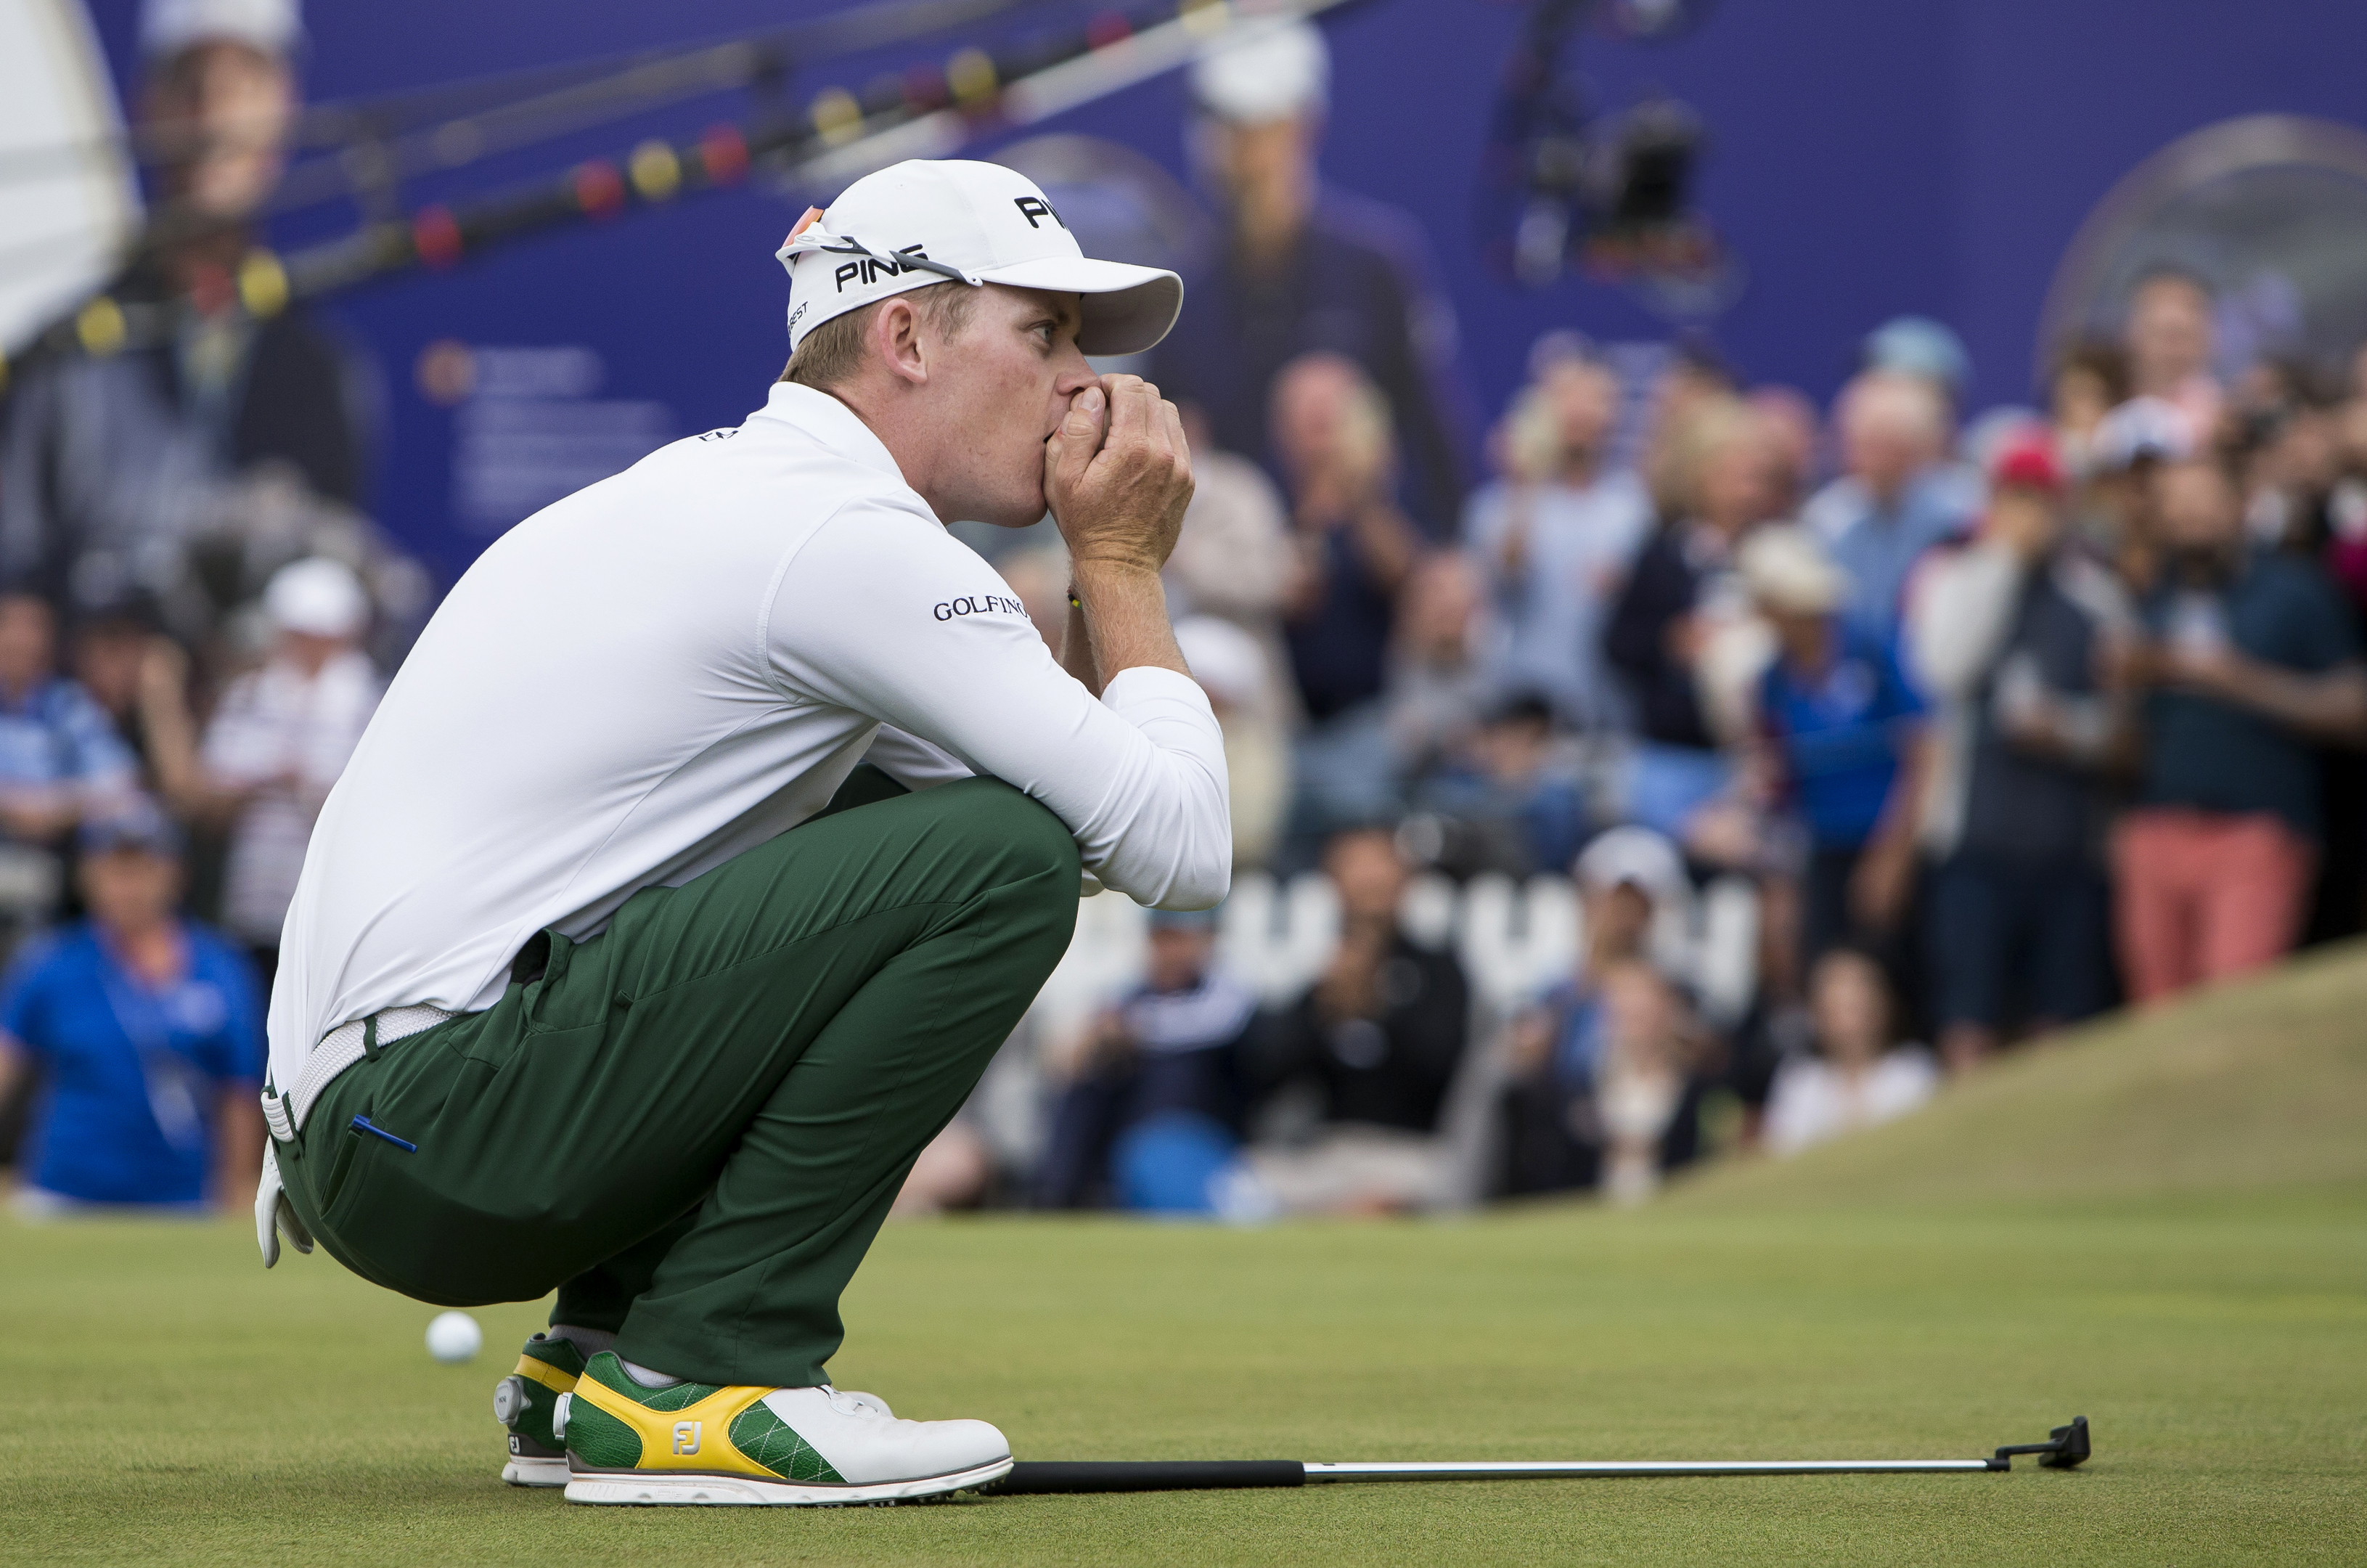 Brandon Stone can;t believe his putt for a 59 in the final round of the Scottish Open has missed.